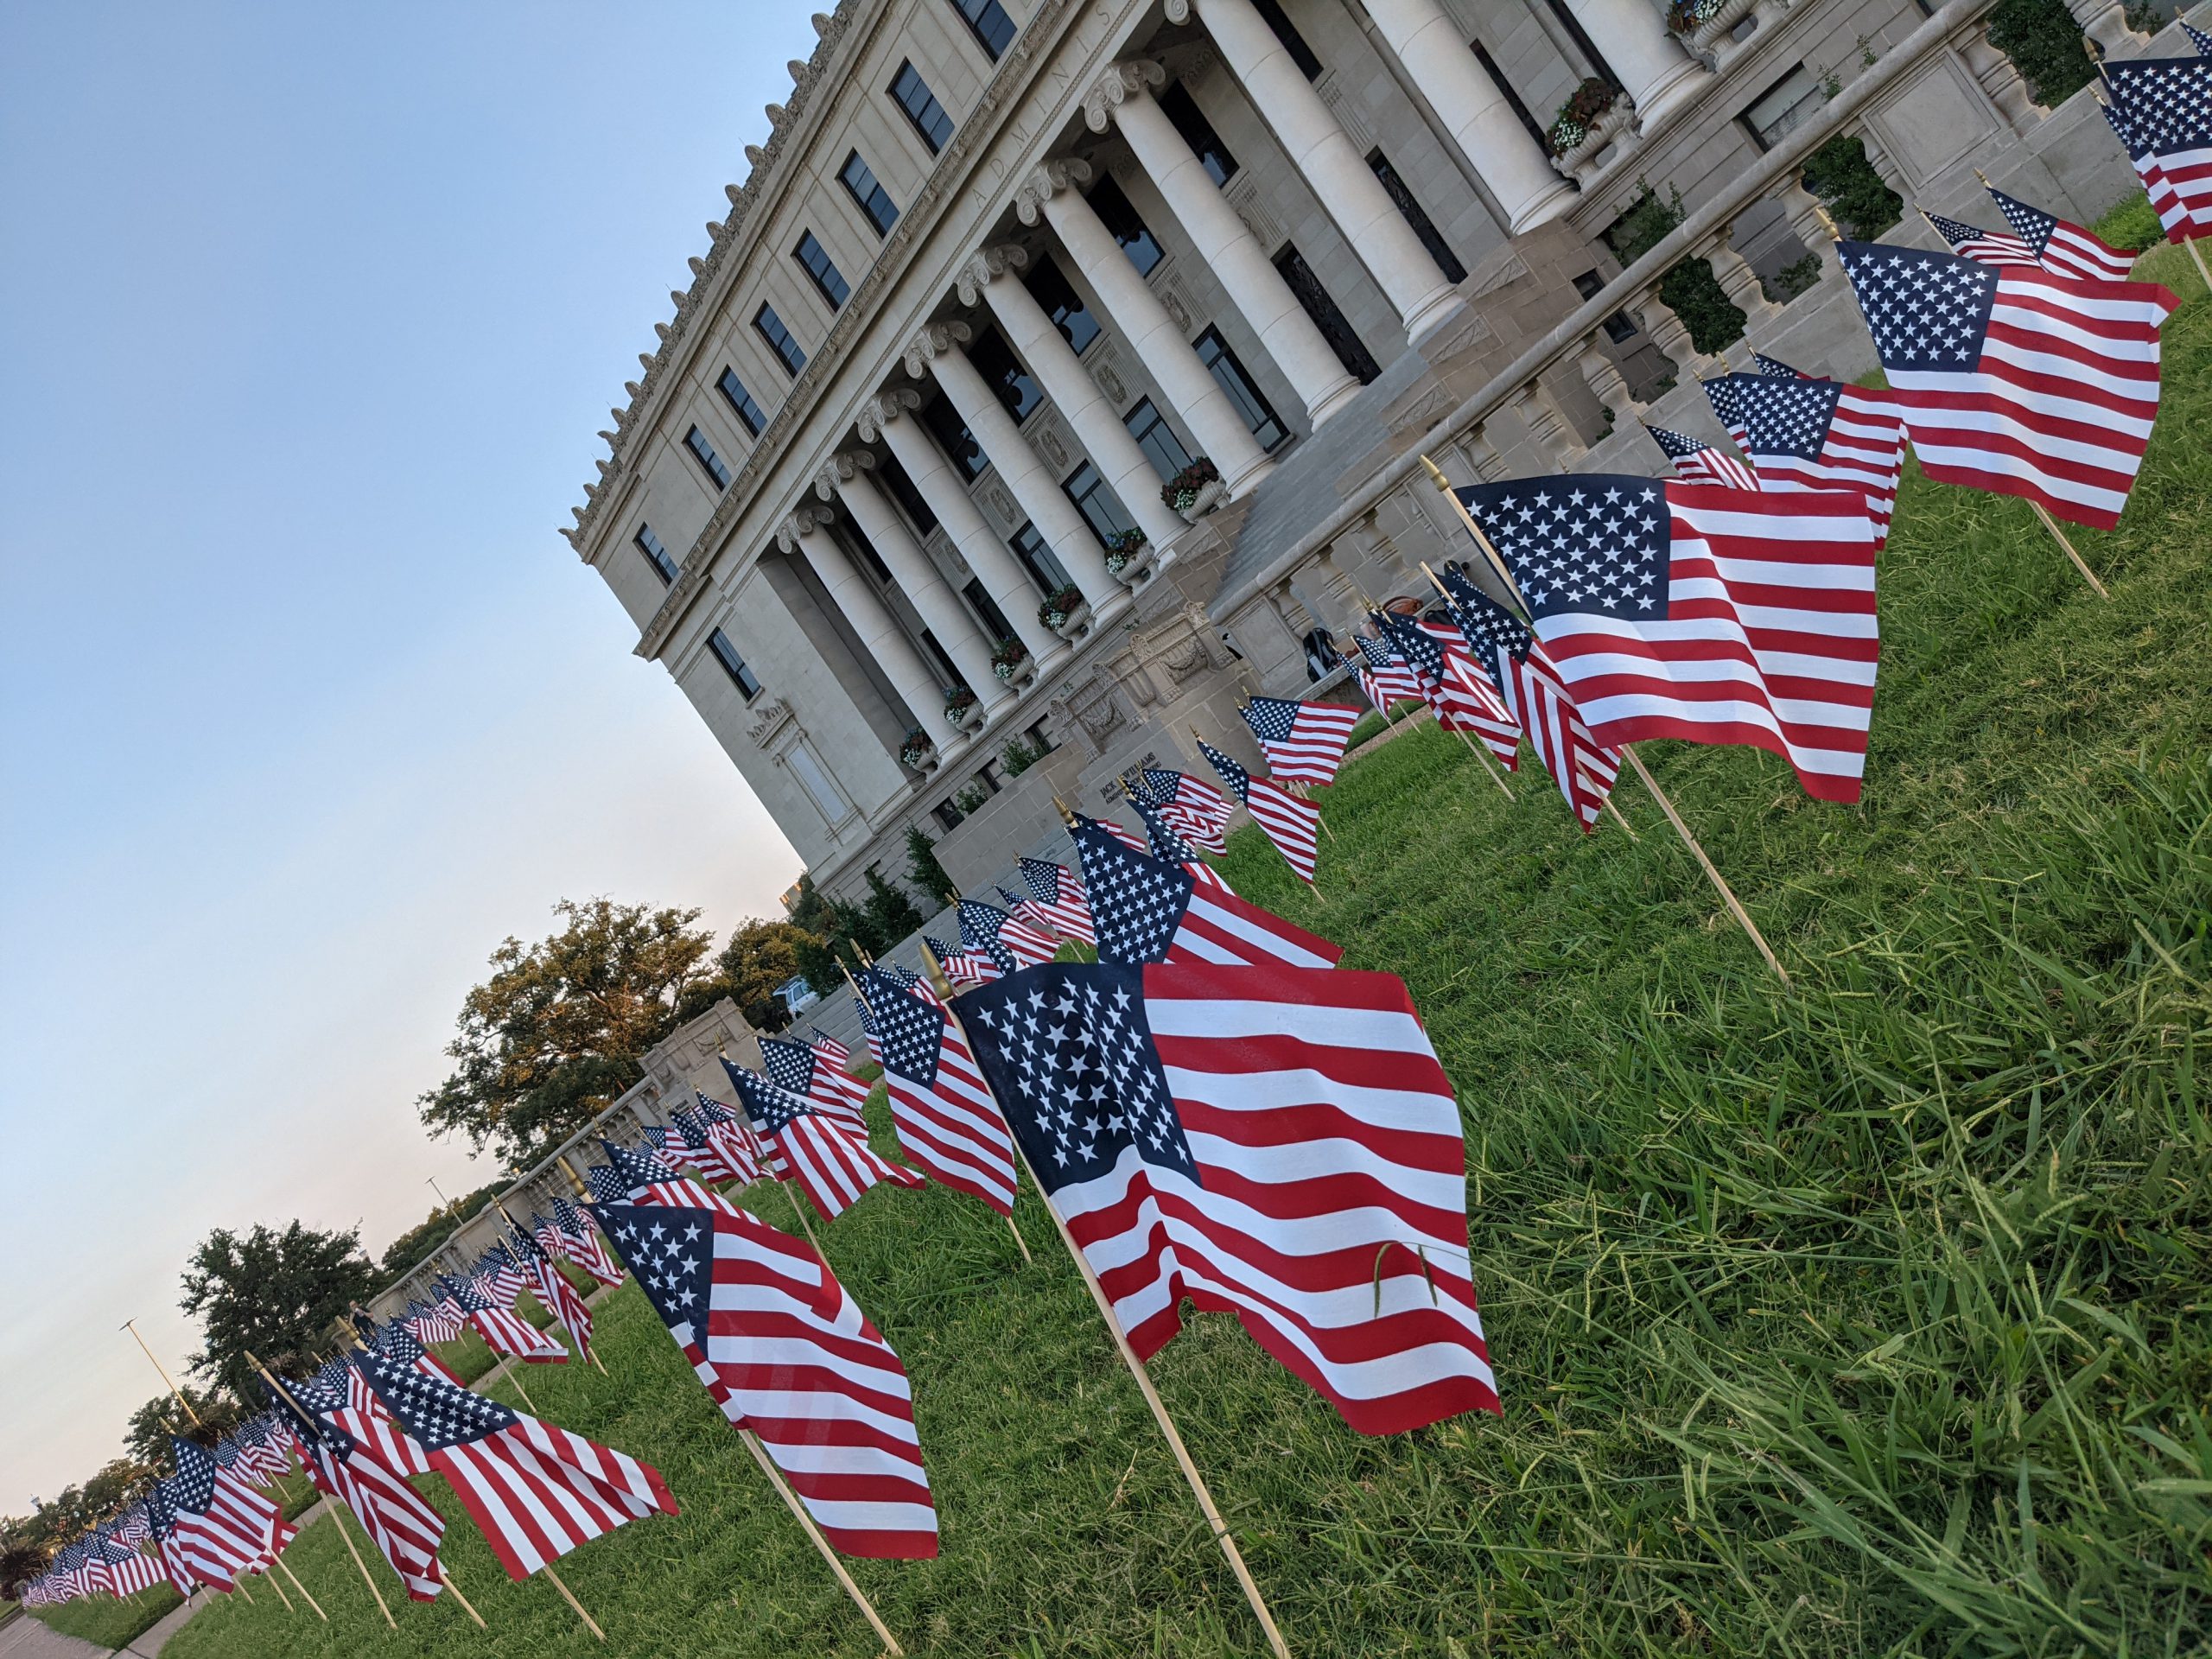 Rows of U.S. flags decorate the lawn in front of the Jack K. Williams Administration Building